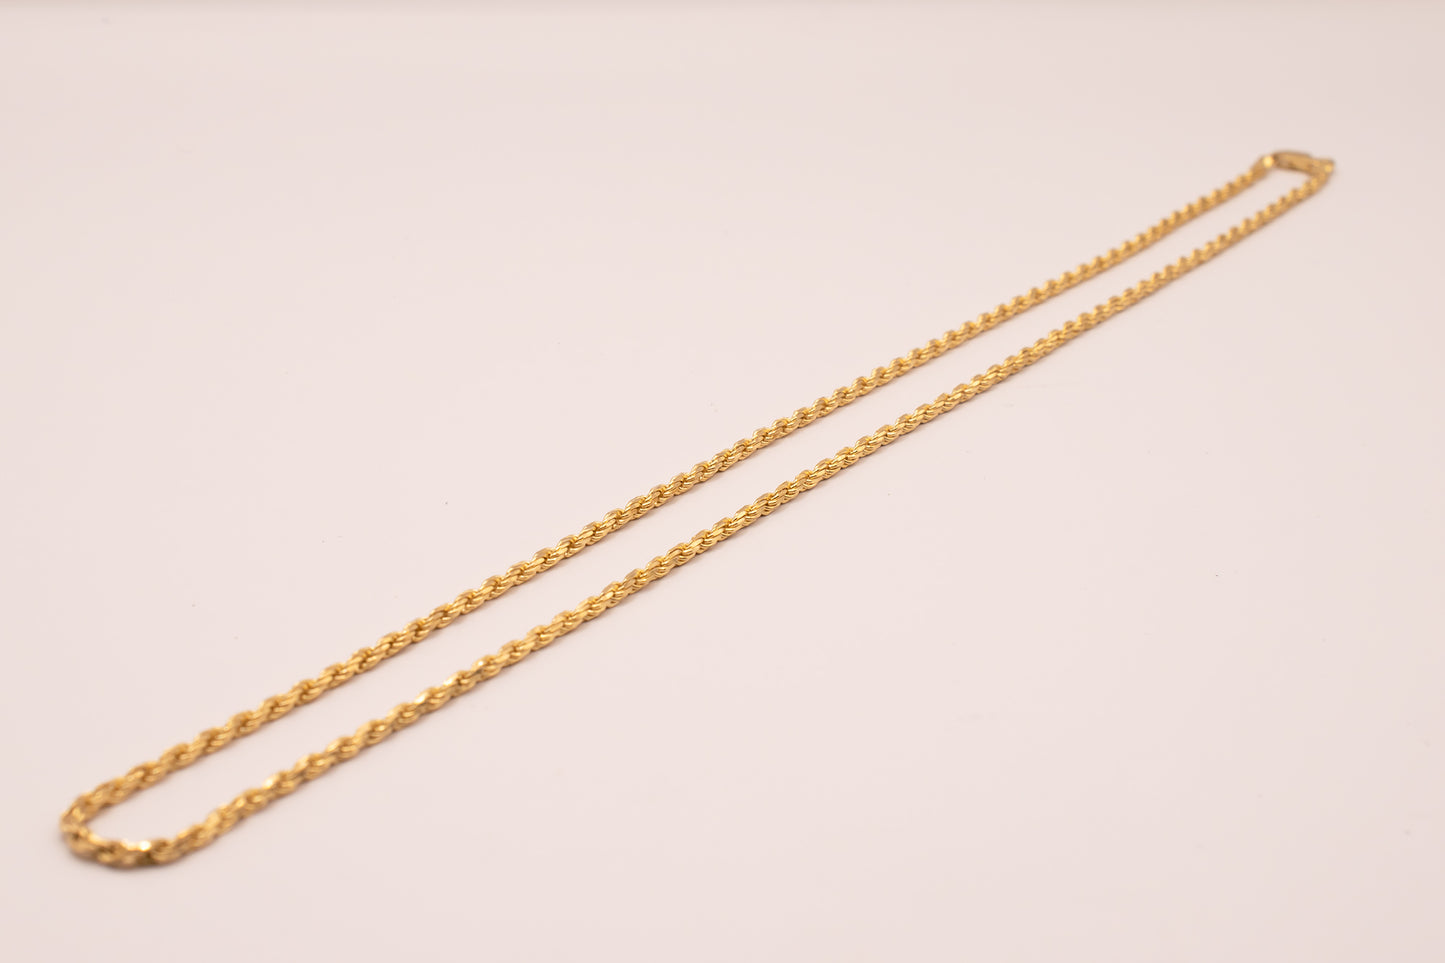 Vintage 14k Solid Gold Rope Chain